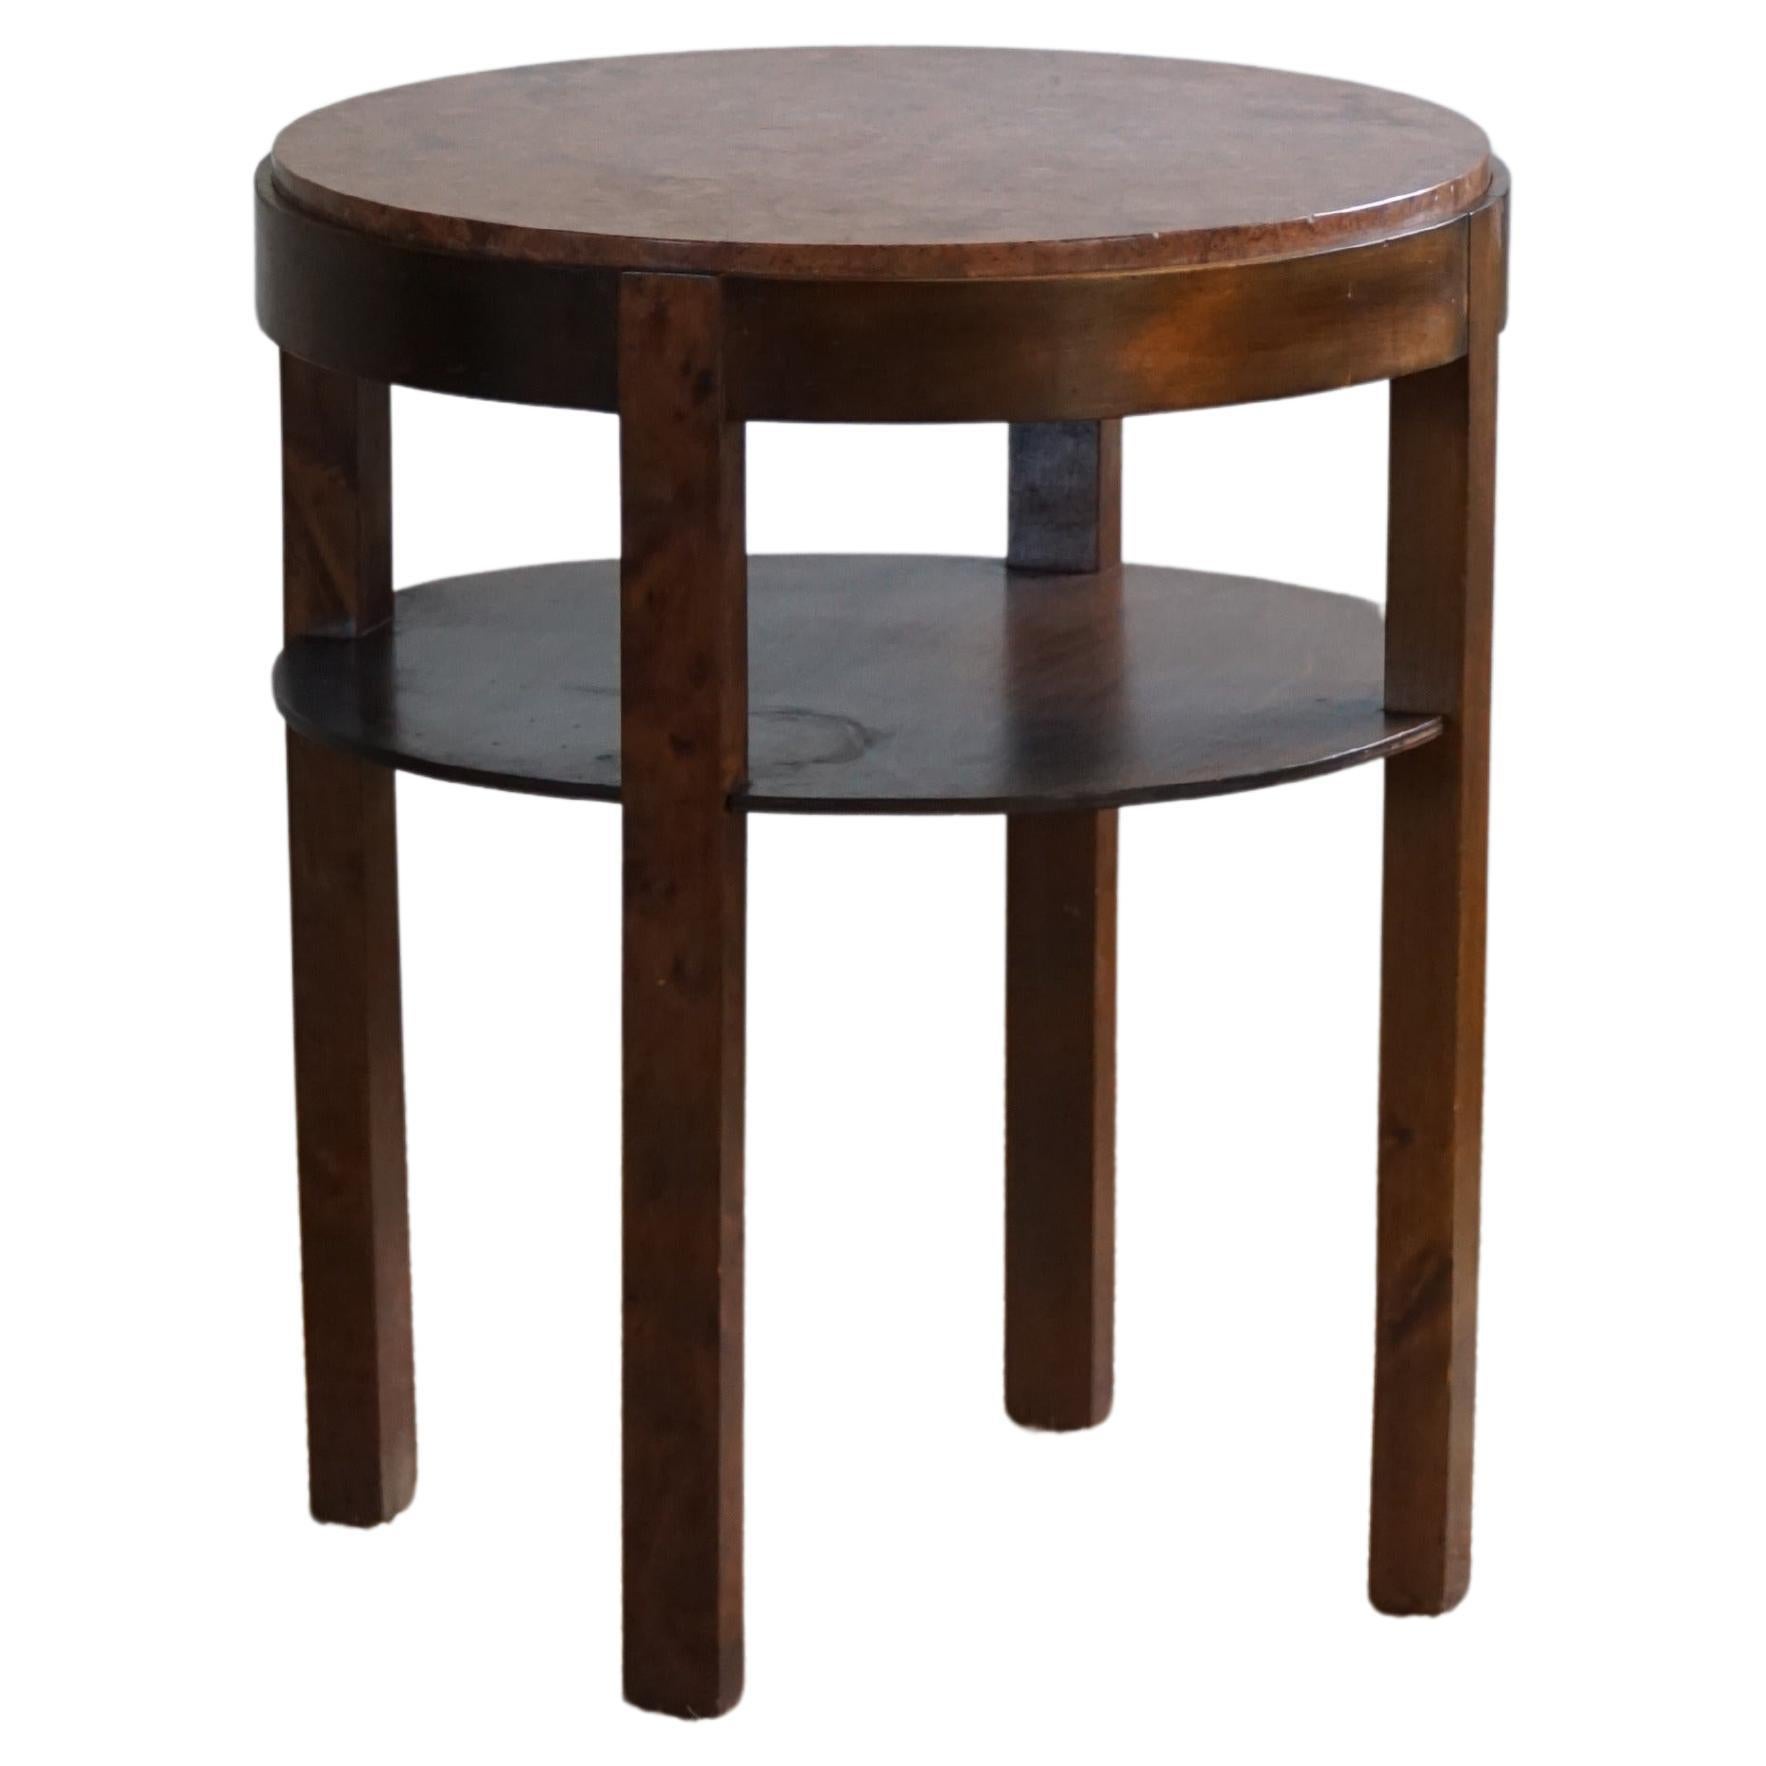 Round Art Deco Side Table in Beech & Marble Top, By a Danish Cabinetmaker, 1940s